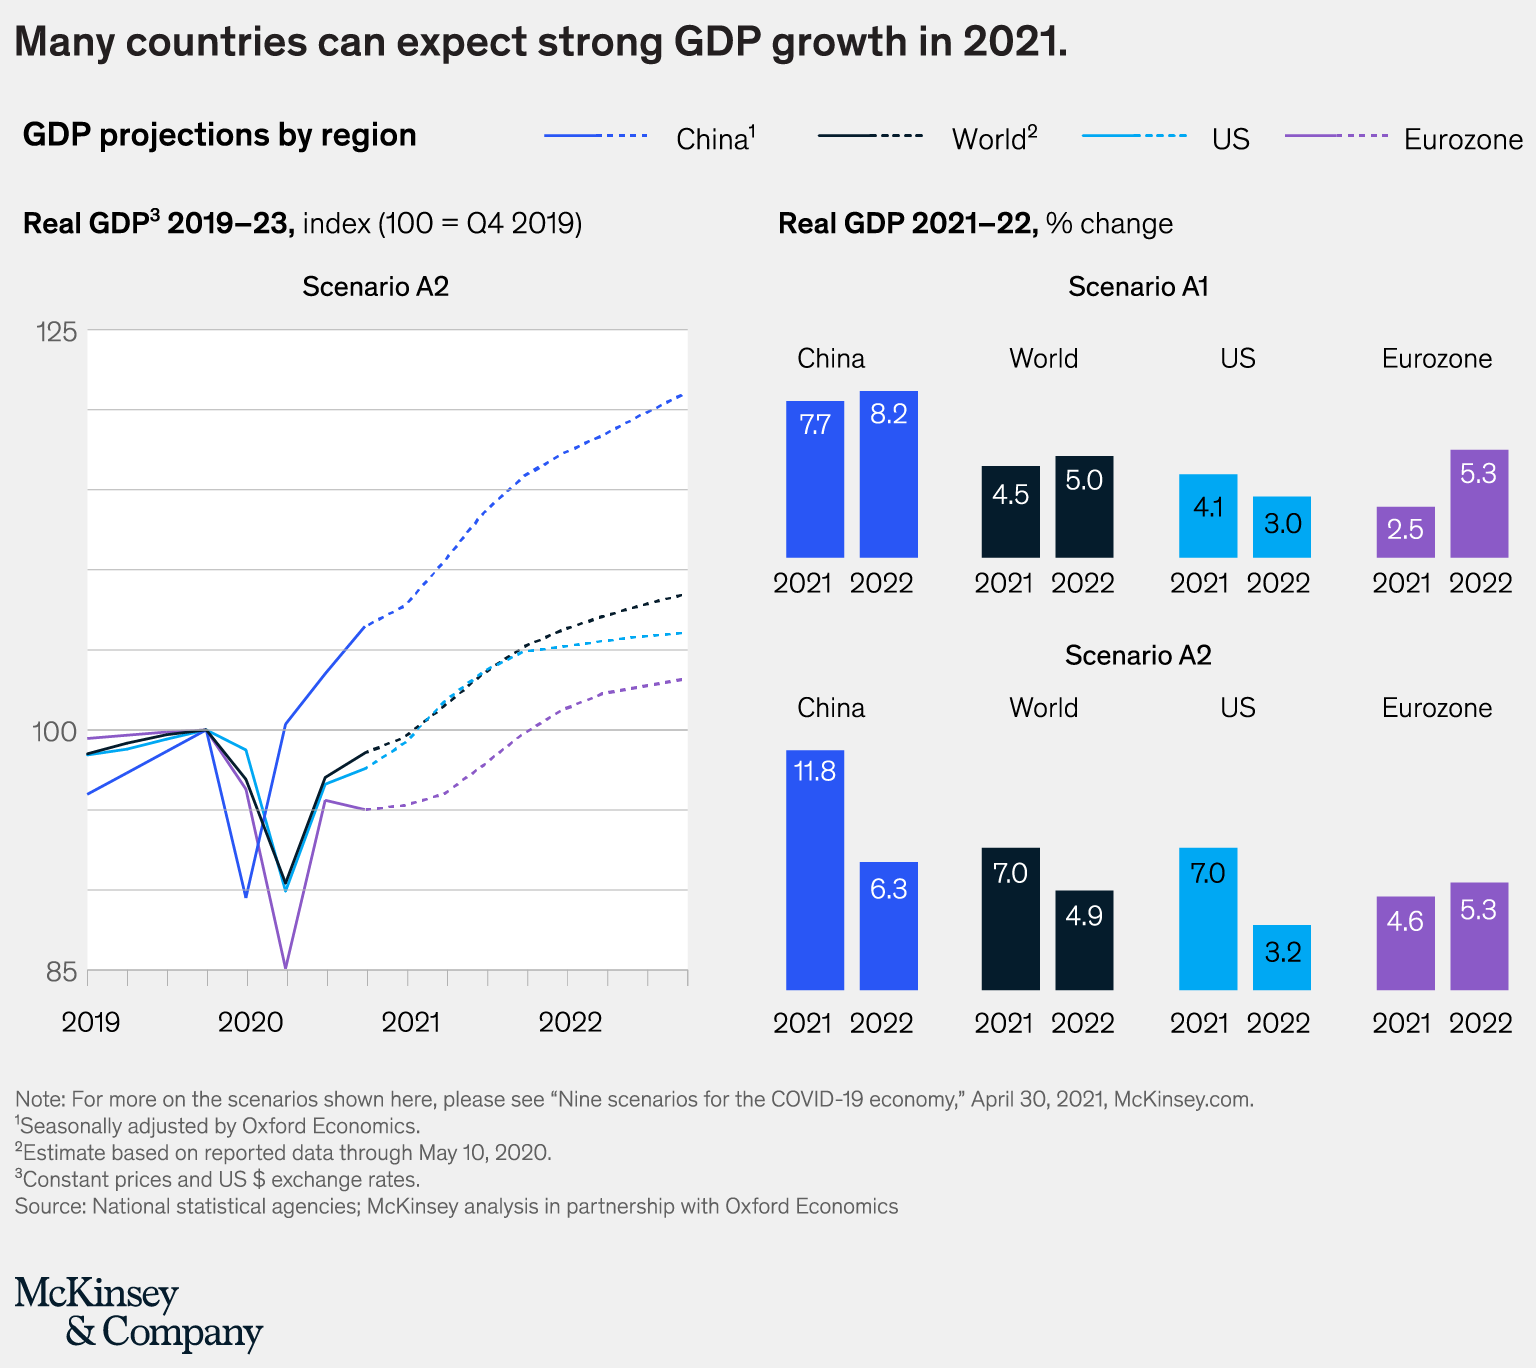 Many countries can expect strong growth in 2021.